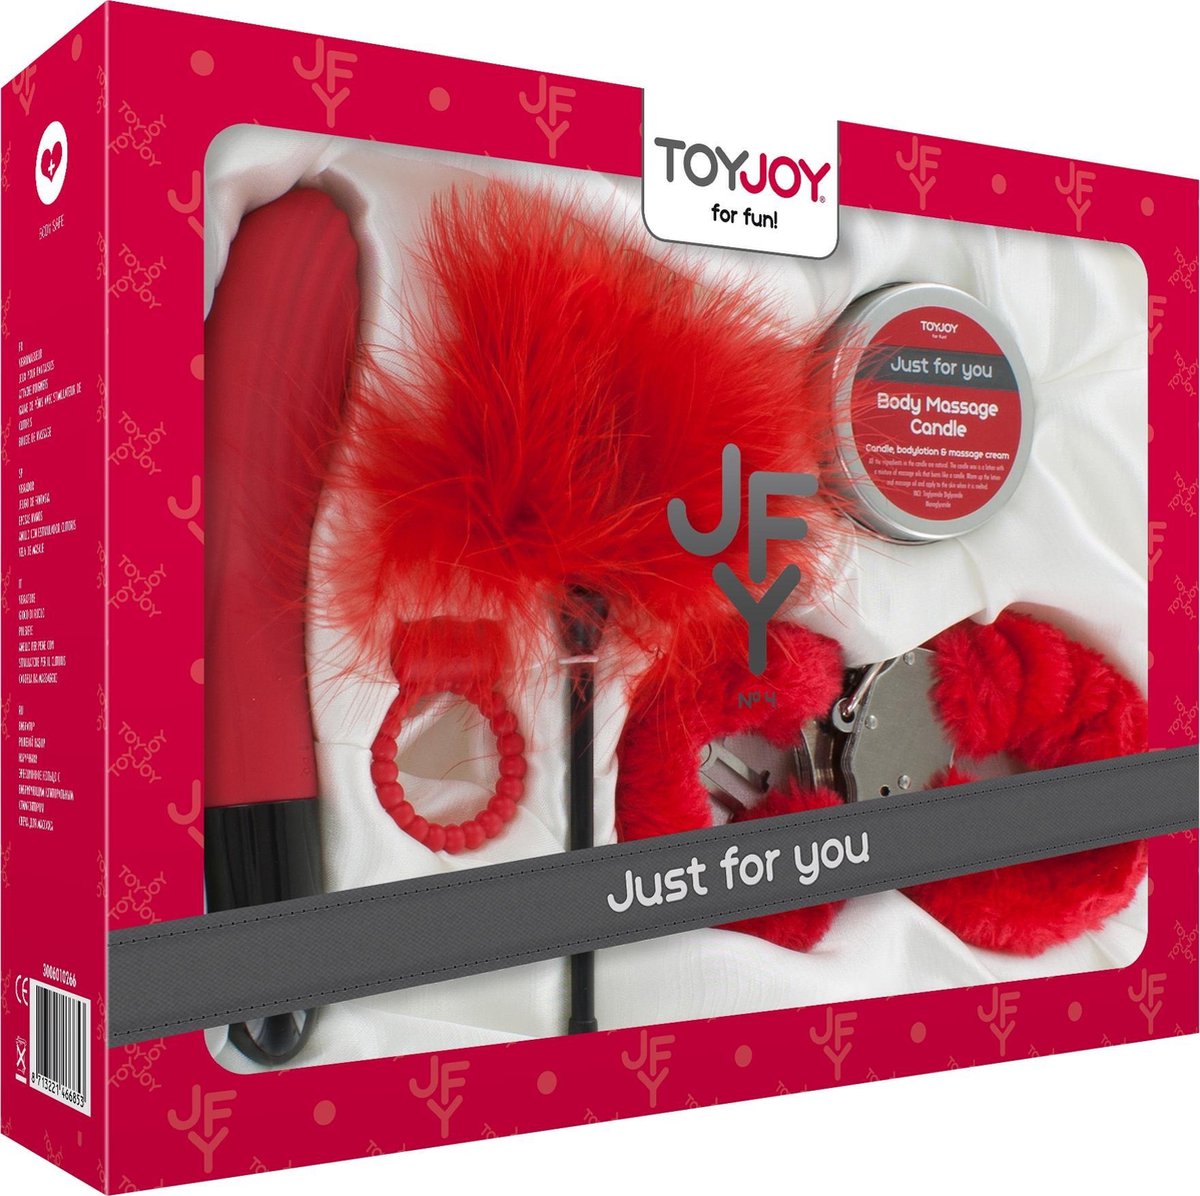 ToyJoy Just For You Luxe no 4. - Rouge - Coffret cadeau | bol